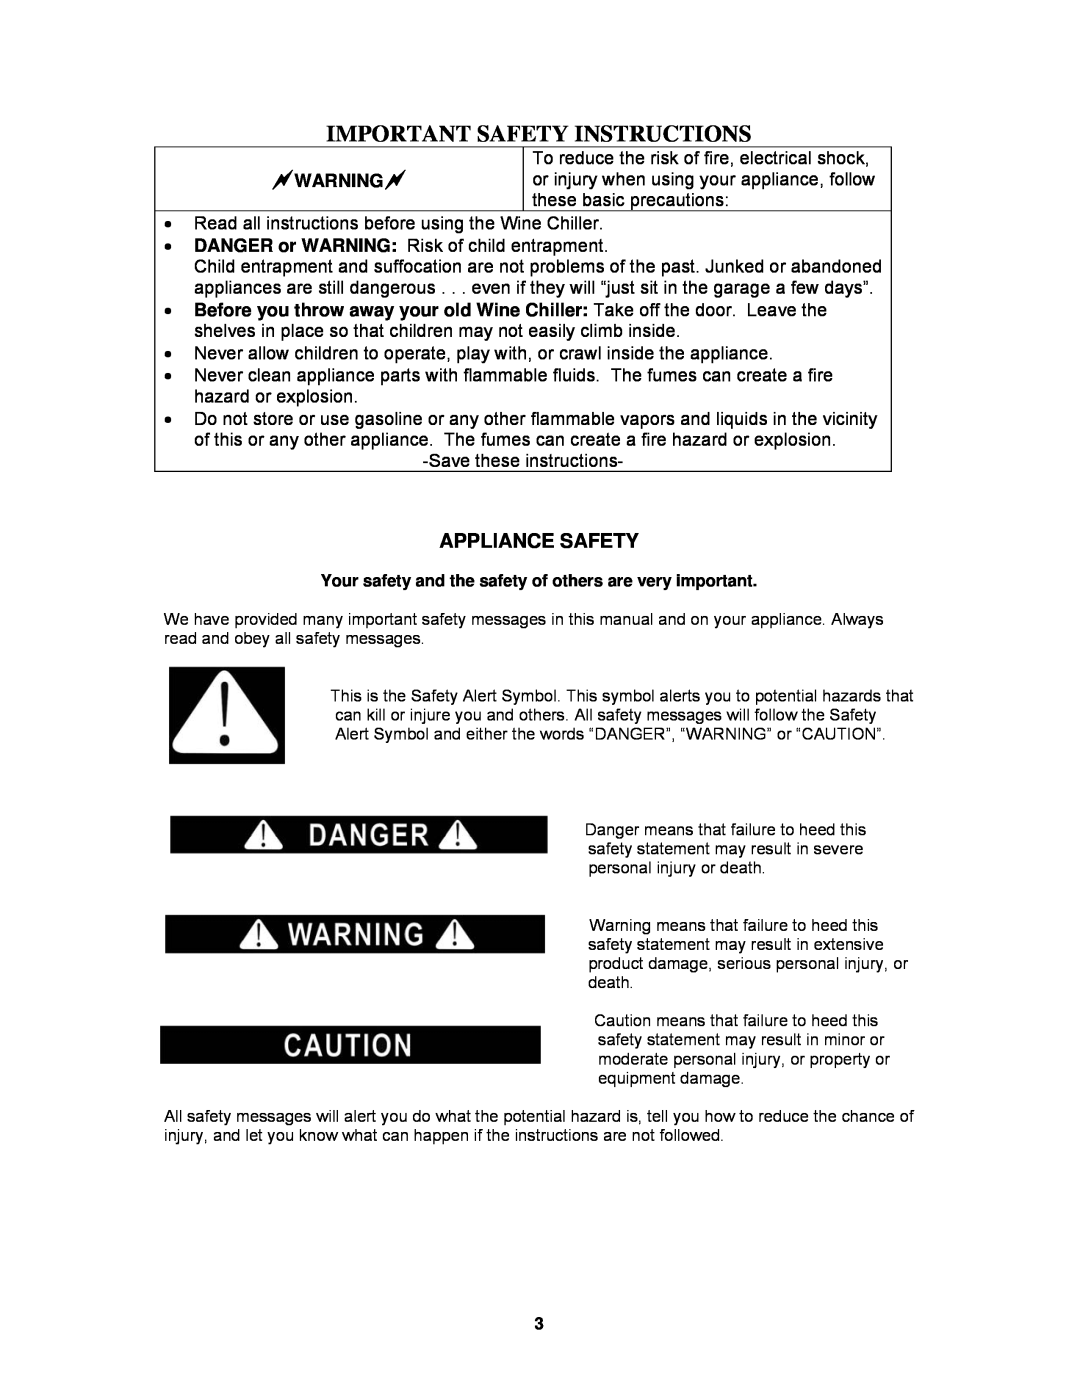 Avanti WC30SSR instruction manual Important Safety Instructions, Appliance Safety 